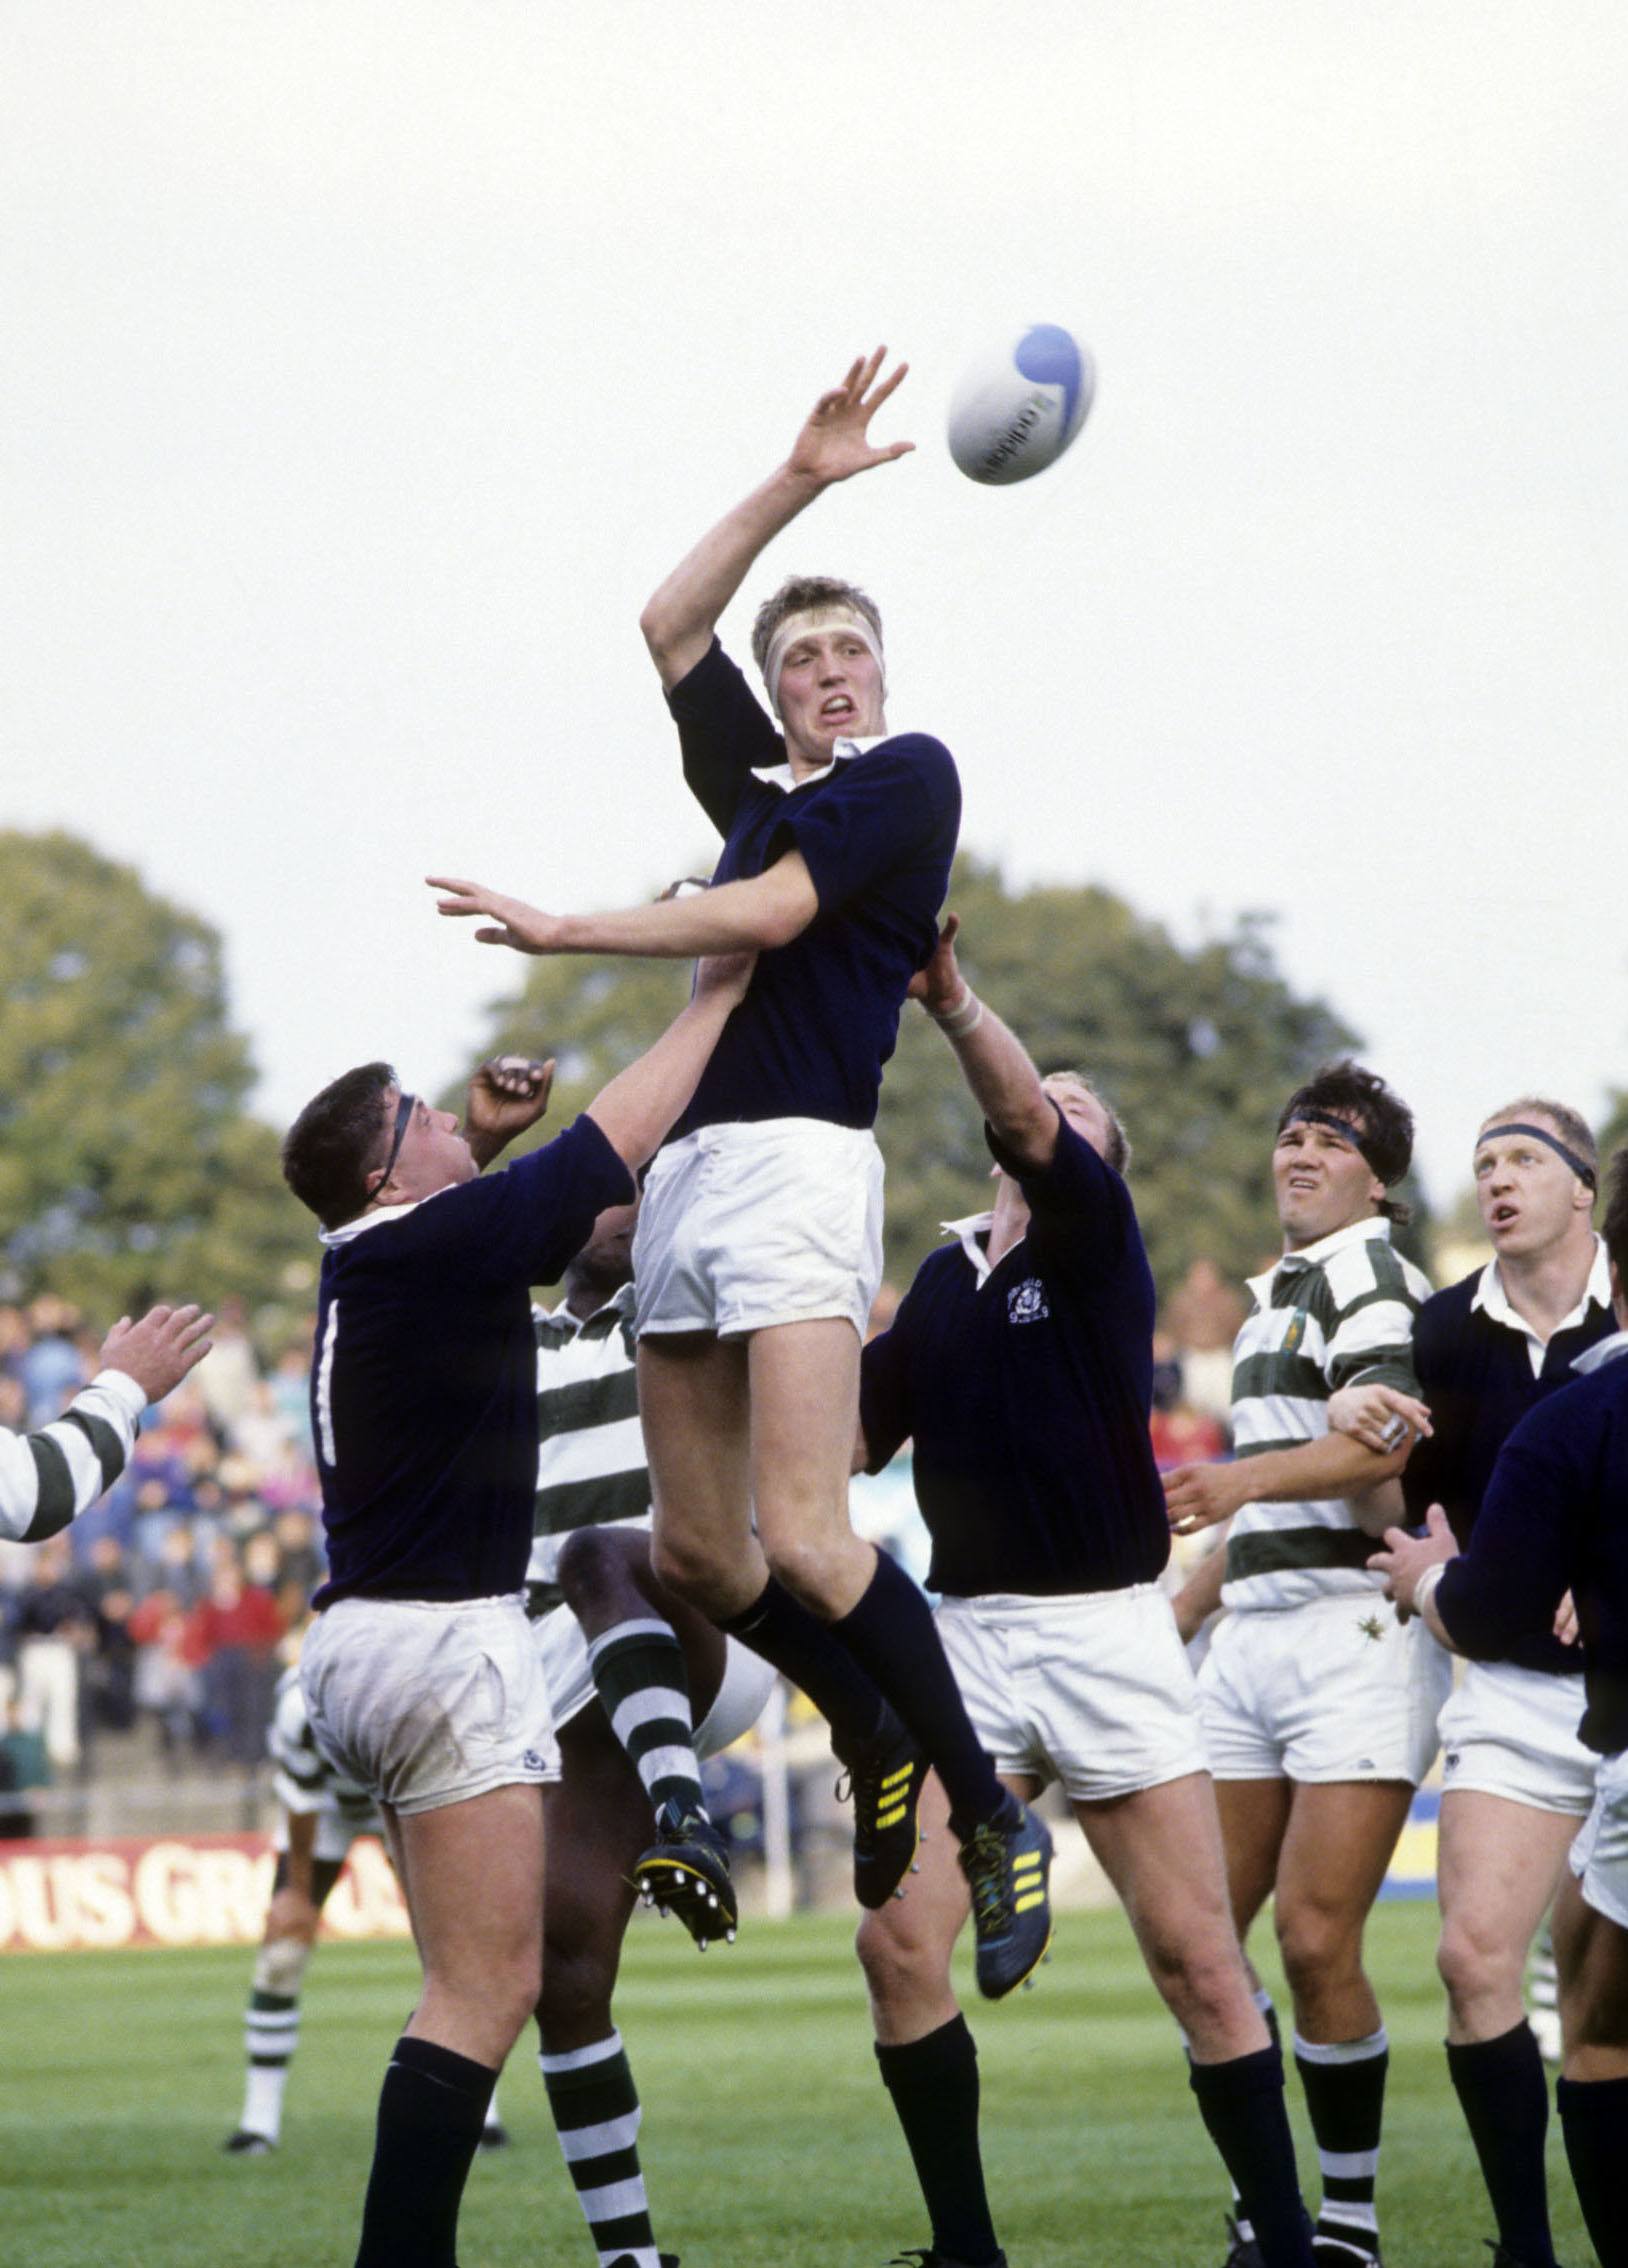 Rugby World Cup 1991, Scotland vs. Zimbabwe - Scotland second row Weir wins the ball at the lineout.